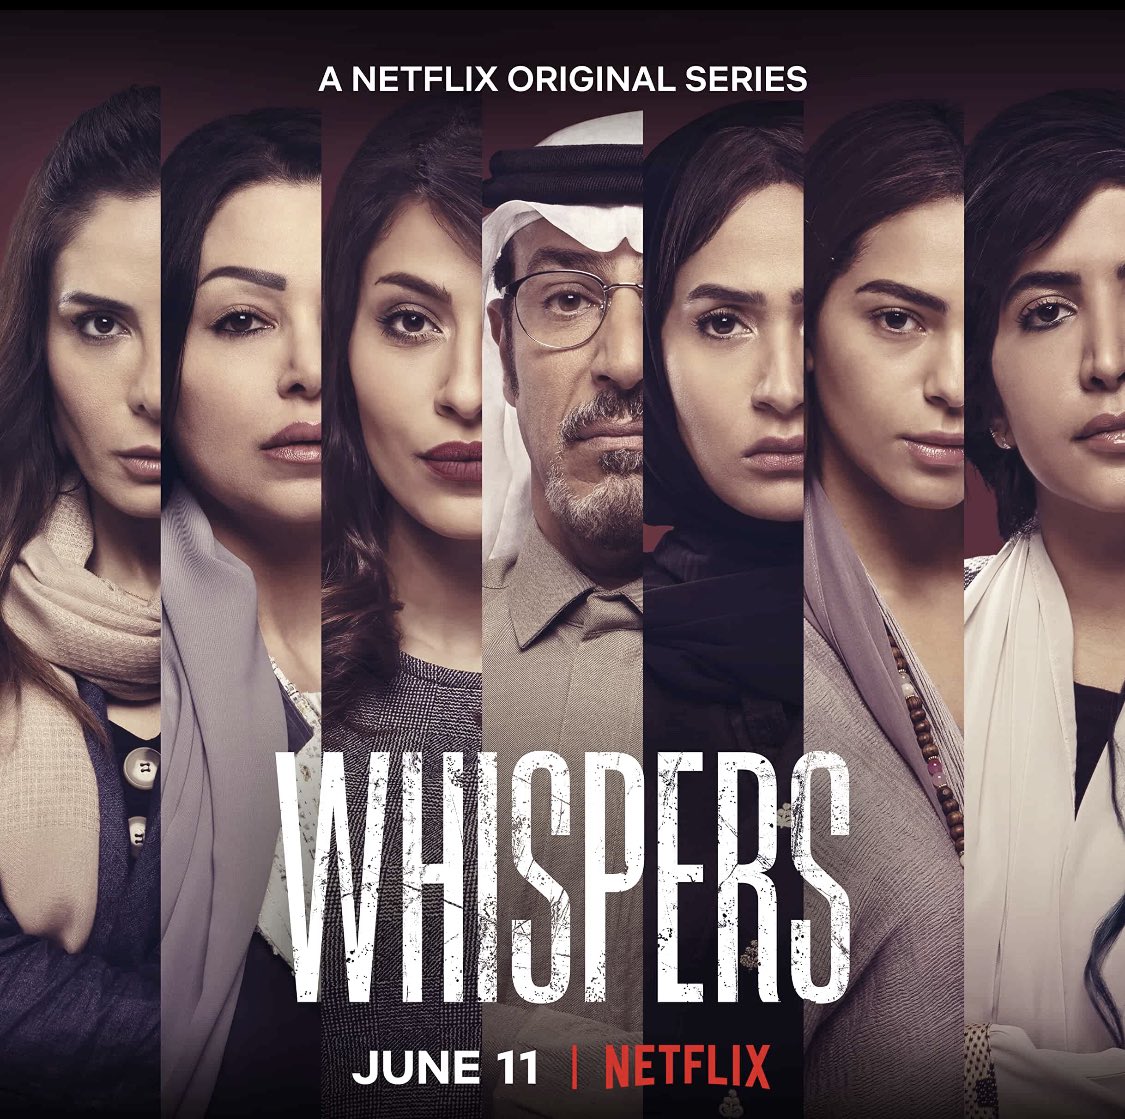 #Whispers (Arabic|2020) - NETFLIX Series. S1-8 Eps (45Mins each) Abt d events hapng aftr d death of a Businessman in an accident ryt b4 d launch of his company’s new app, from family members persoective. Arab culture & writing - Brilliant. Gud Suspense drama. Waiting for S2!